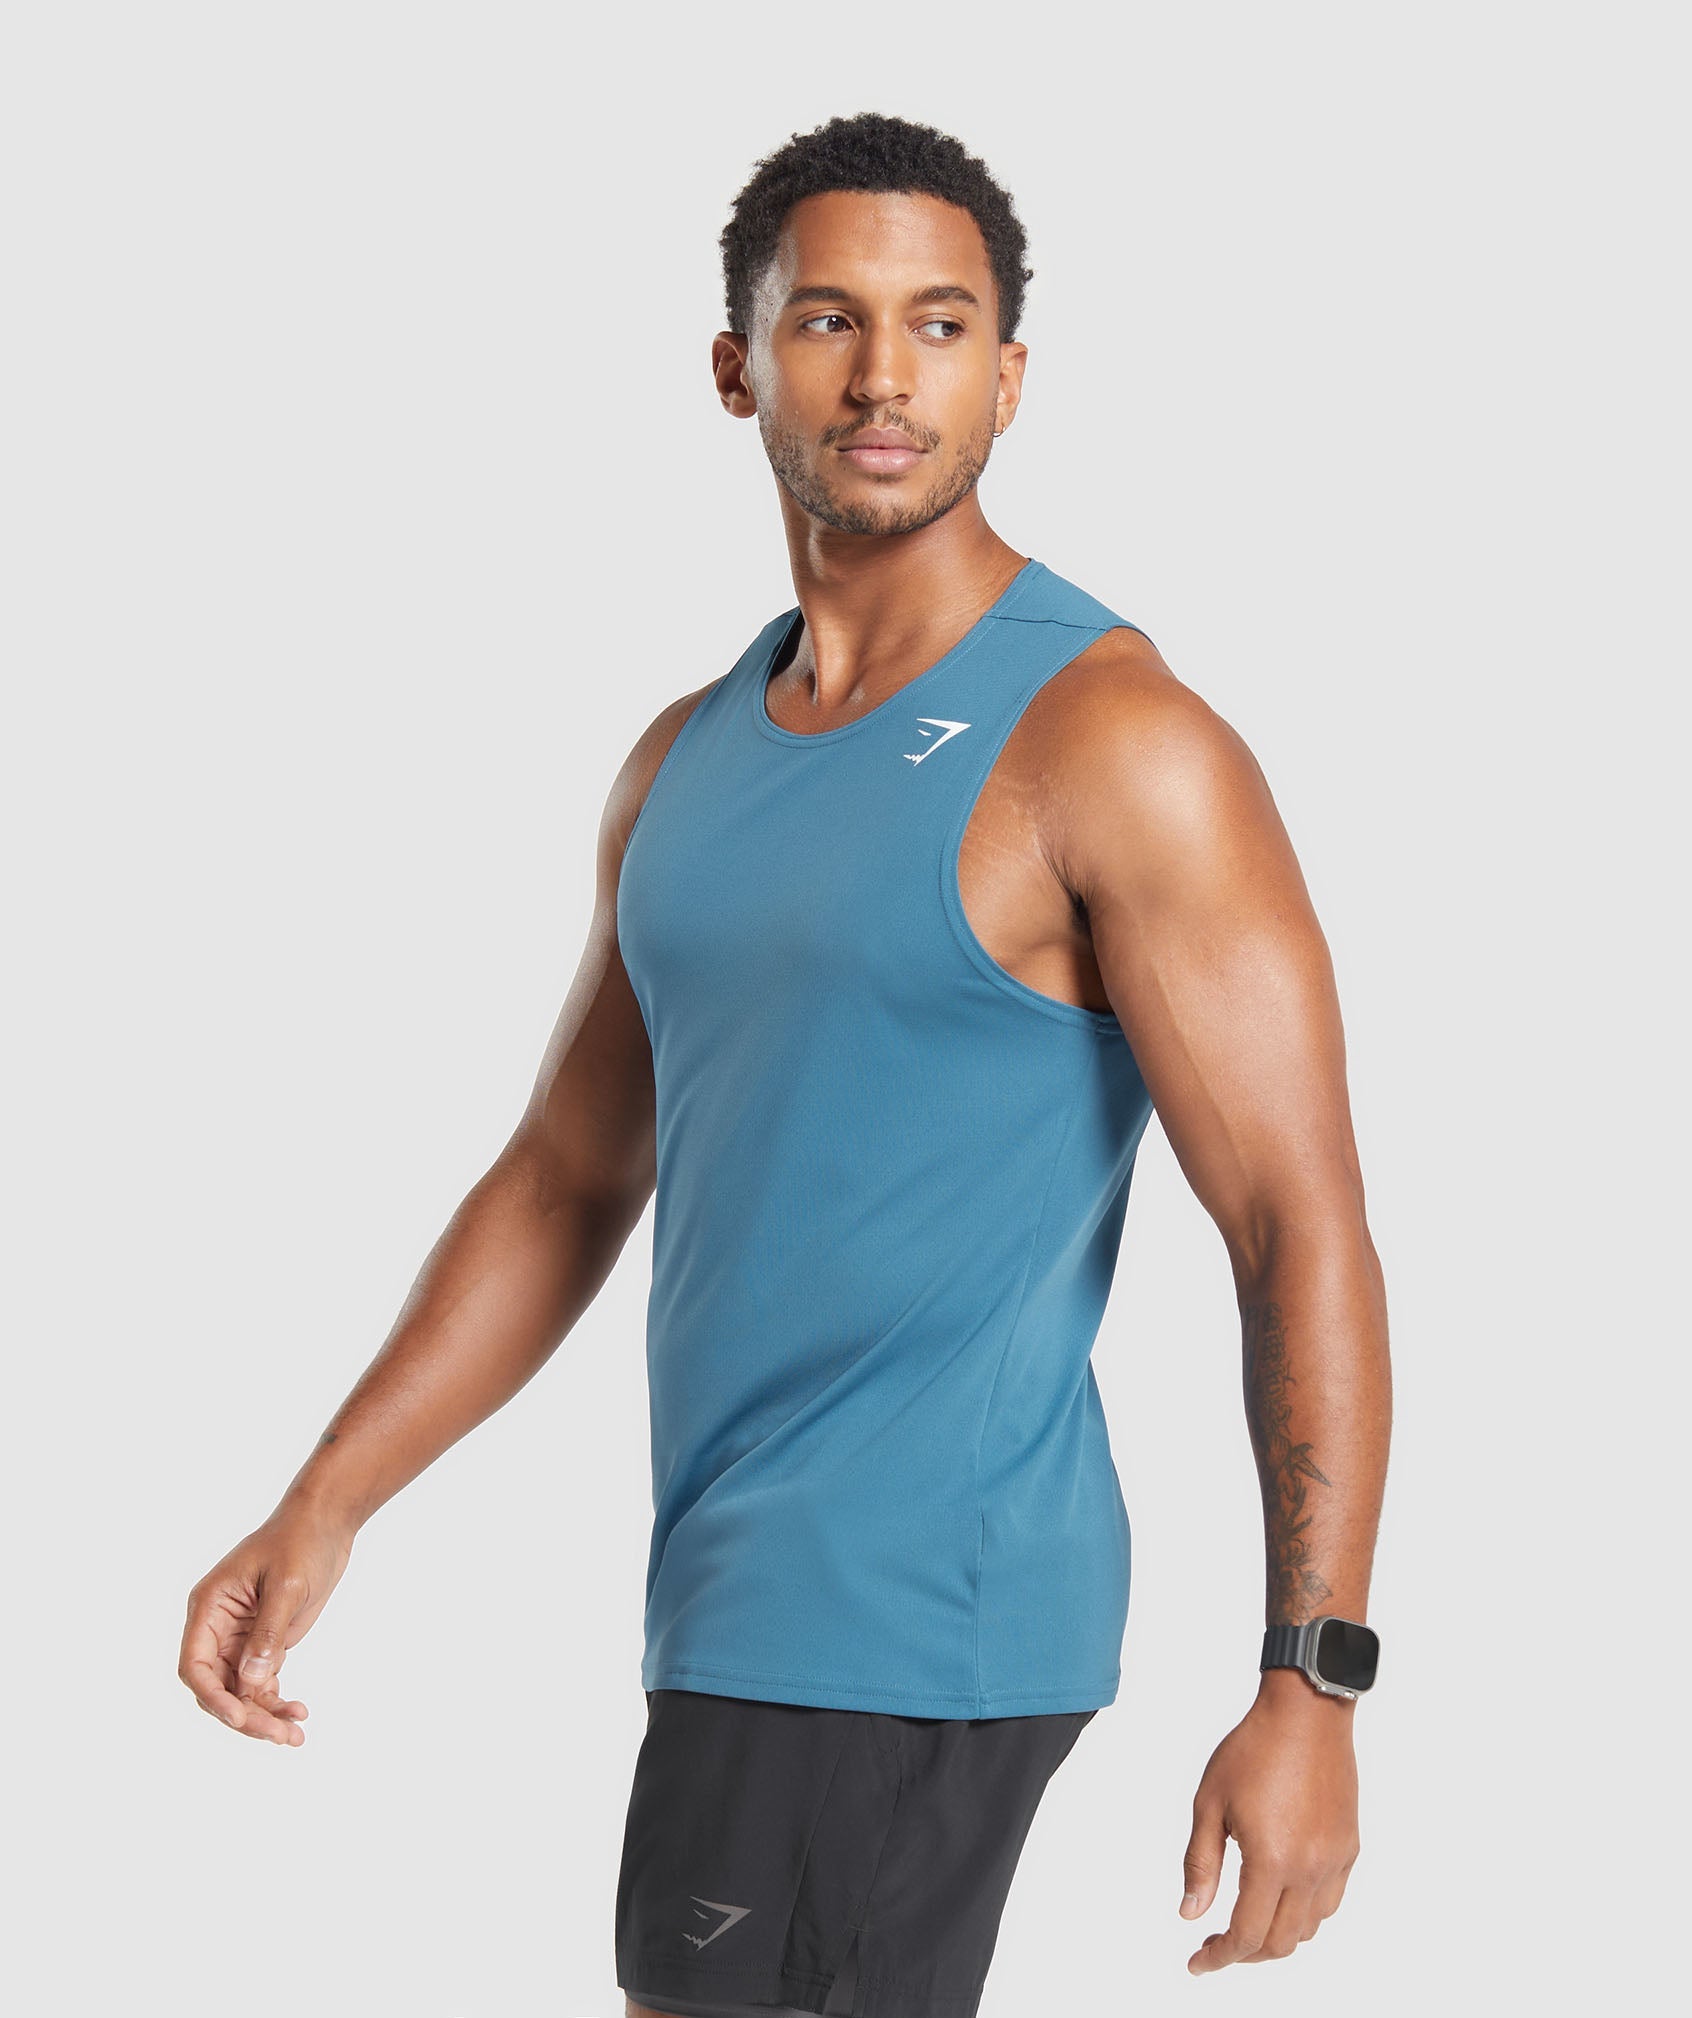 Arrival Tank in Utility Blue - view 3